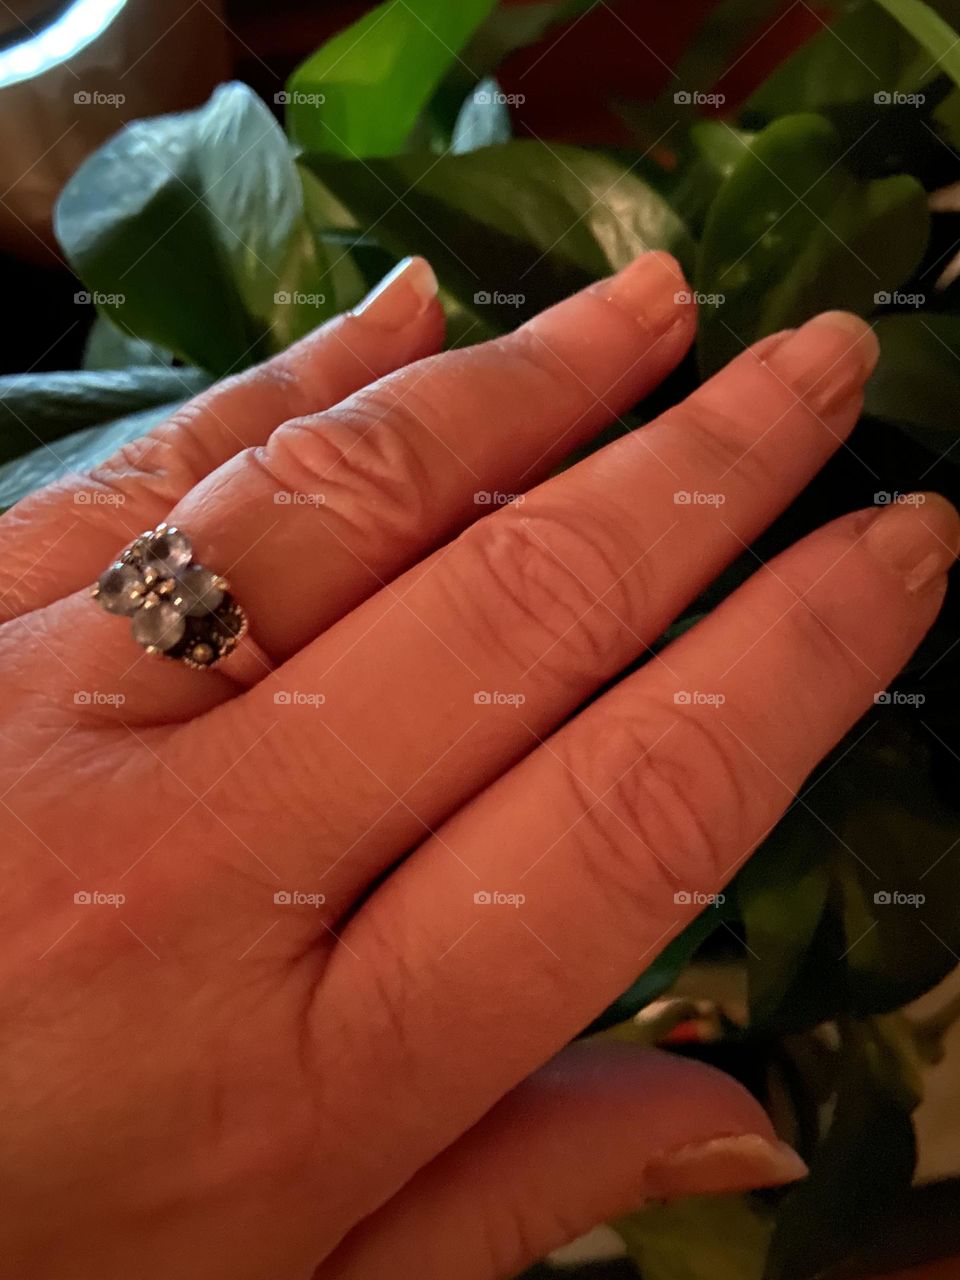 Natural looking but polished nails against the leaves of a plant. Photo shot on my iPhone in night mode. I painted my nails in Sally Hansen Diamond Strength No Chip Nail Color in “24 Karat” & Revlon Colorstay Gel Envy in “Bet on Love.”